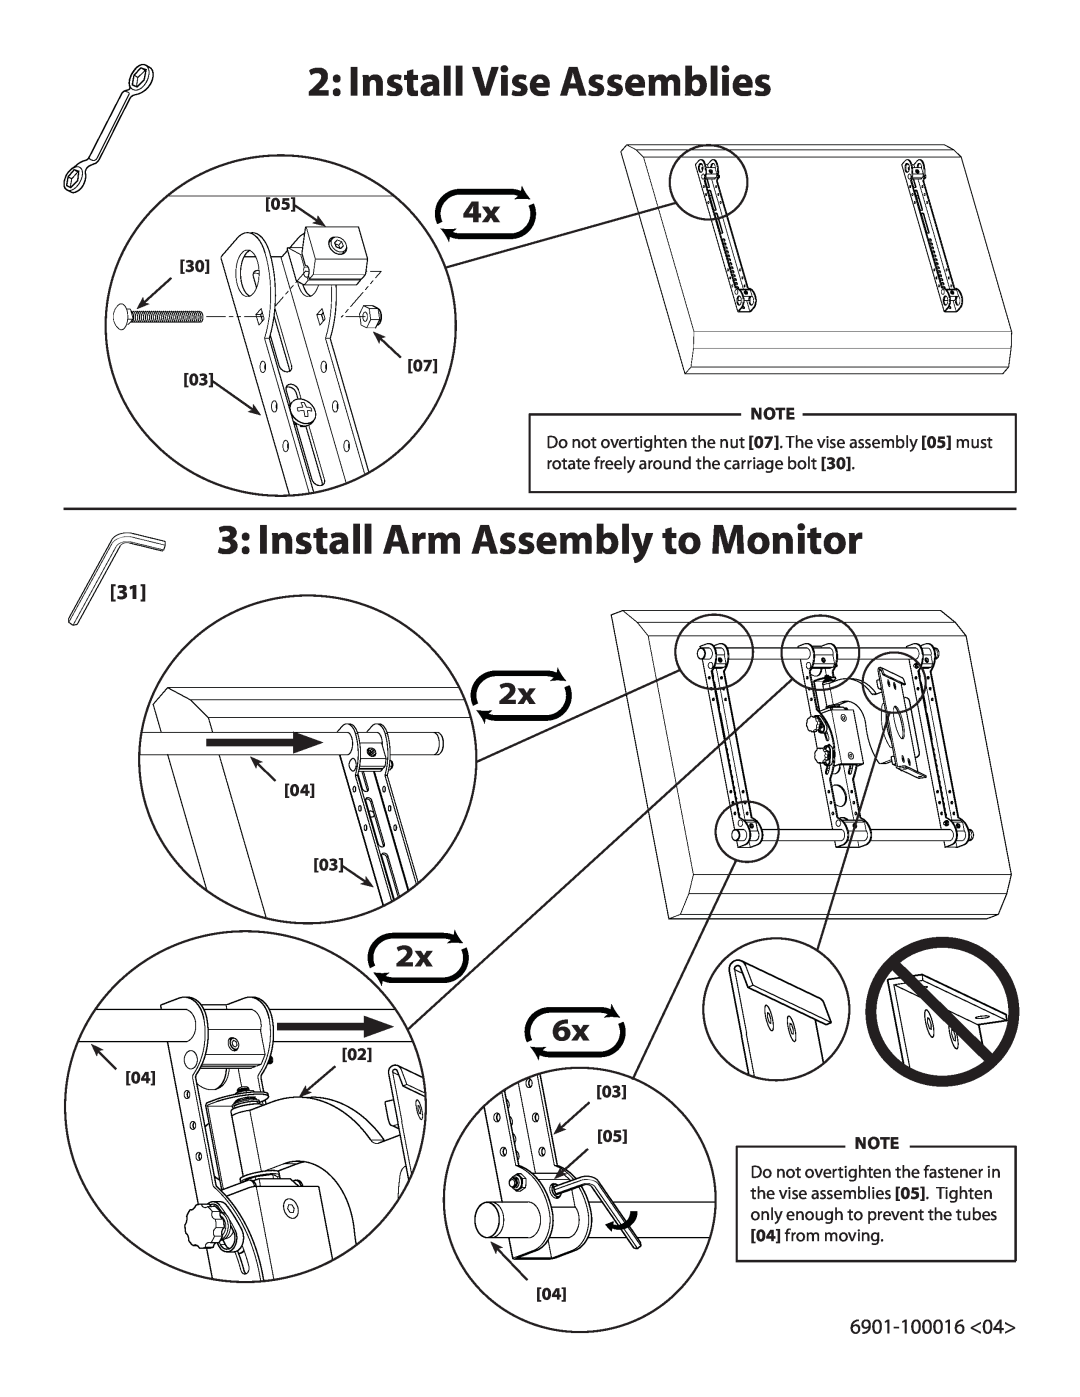 Sanus Systems VMAA18 manual Install Vise Assemblies, Install Arm Assembly to Monitor, 2x, 6901-100016 